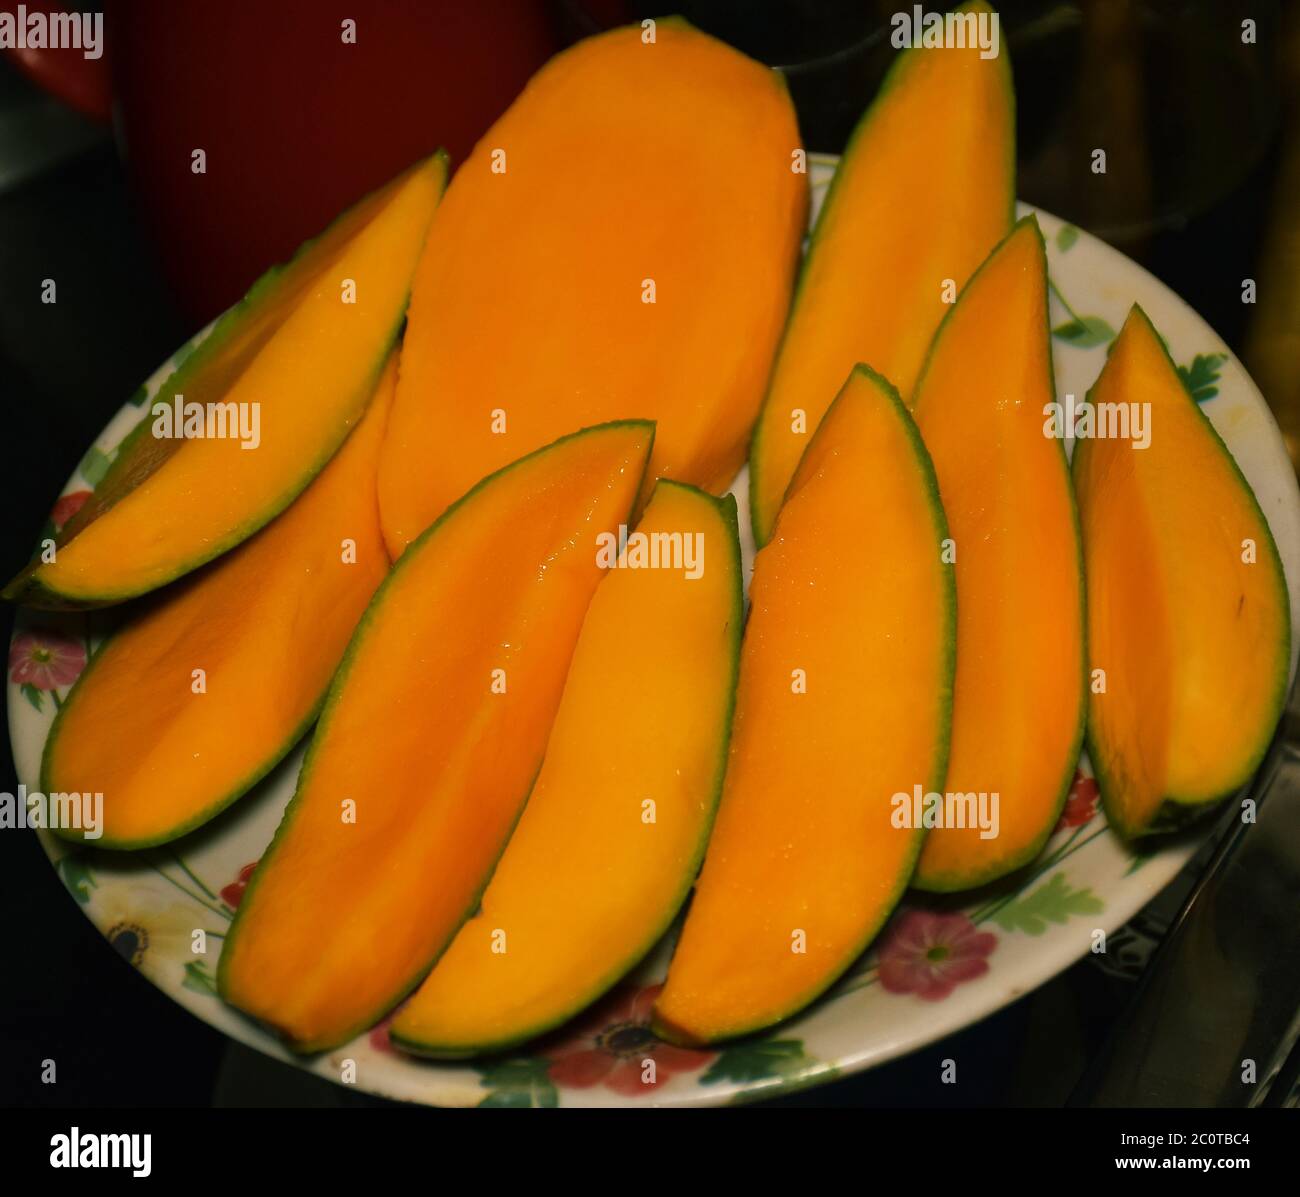 Himsagar High Resolution Stock Photography And Images Alamy The varieties of indian mangoes that are available in west bengal are bombai, himsagar, kishen bhog, langra, fazli, gulabkhas, amrapalli, mallika. https www alamy com delicious indian mango slices or cut pieces image361953540 html